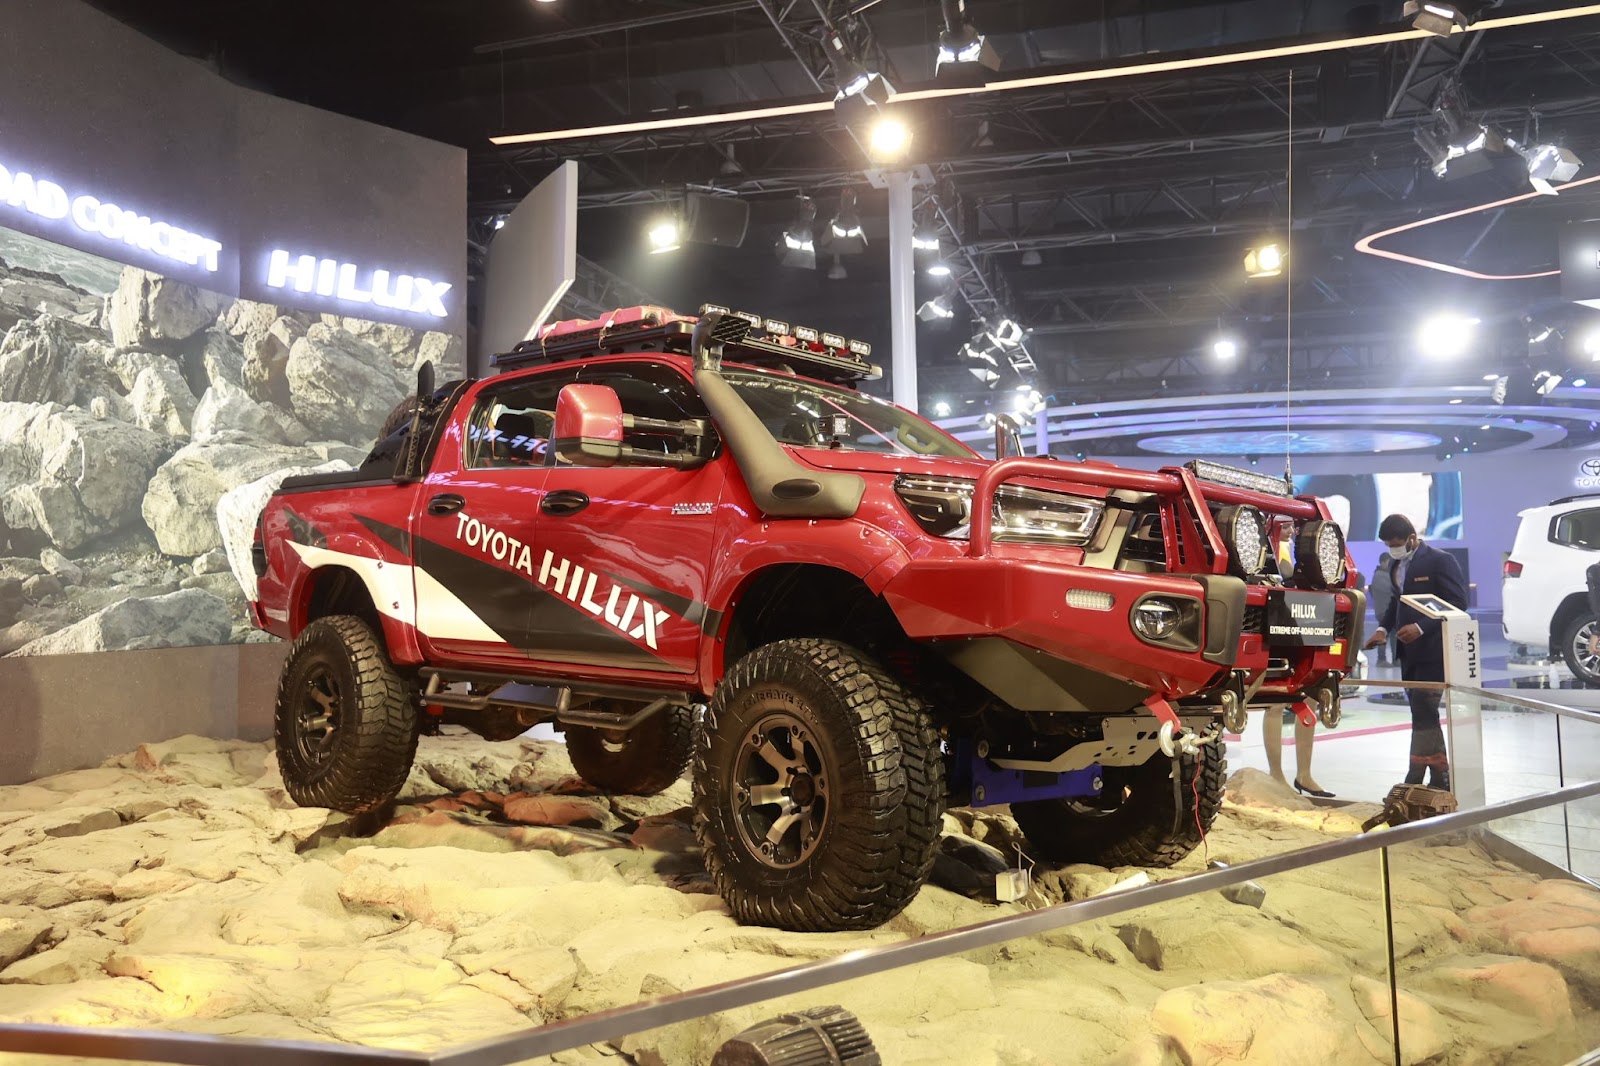 Toyota Hilux Extreme Off-road Concept In 10 Images From The Auto